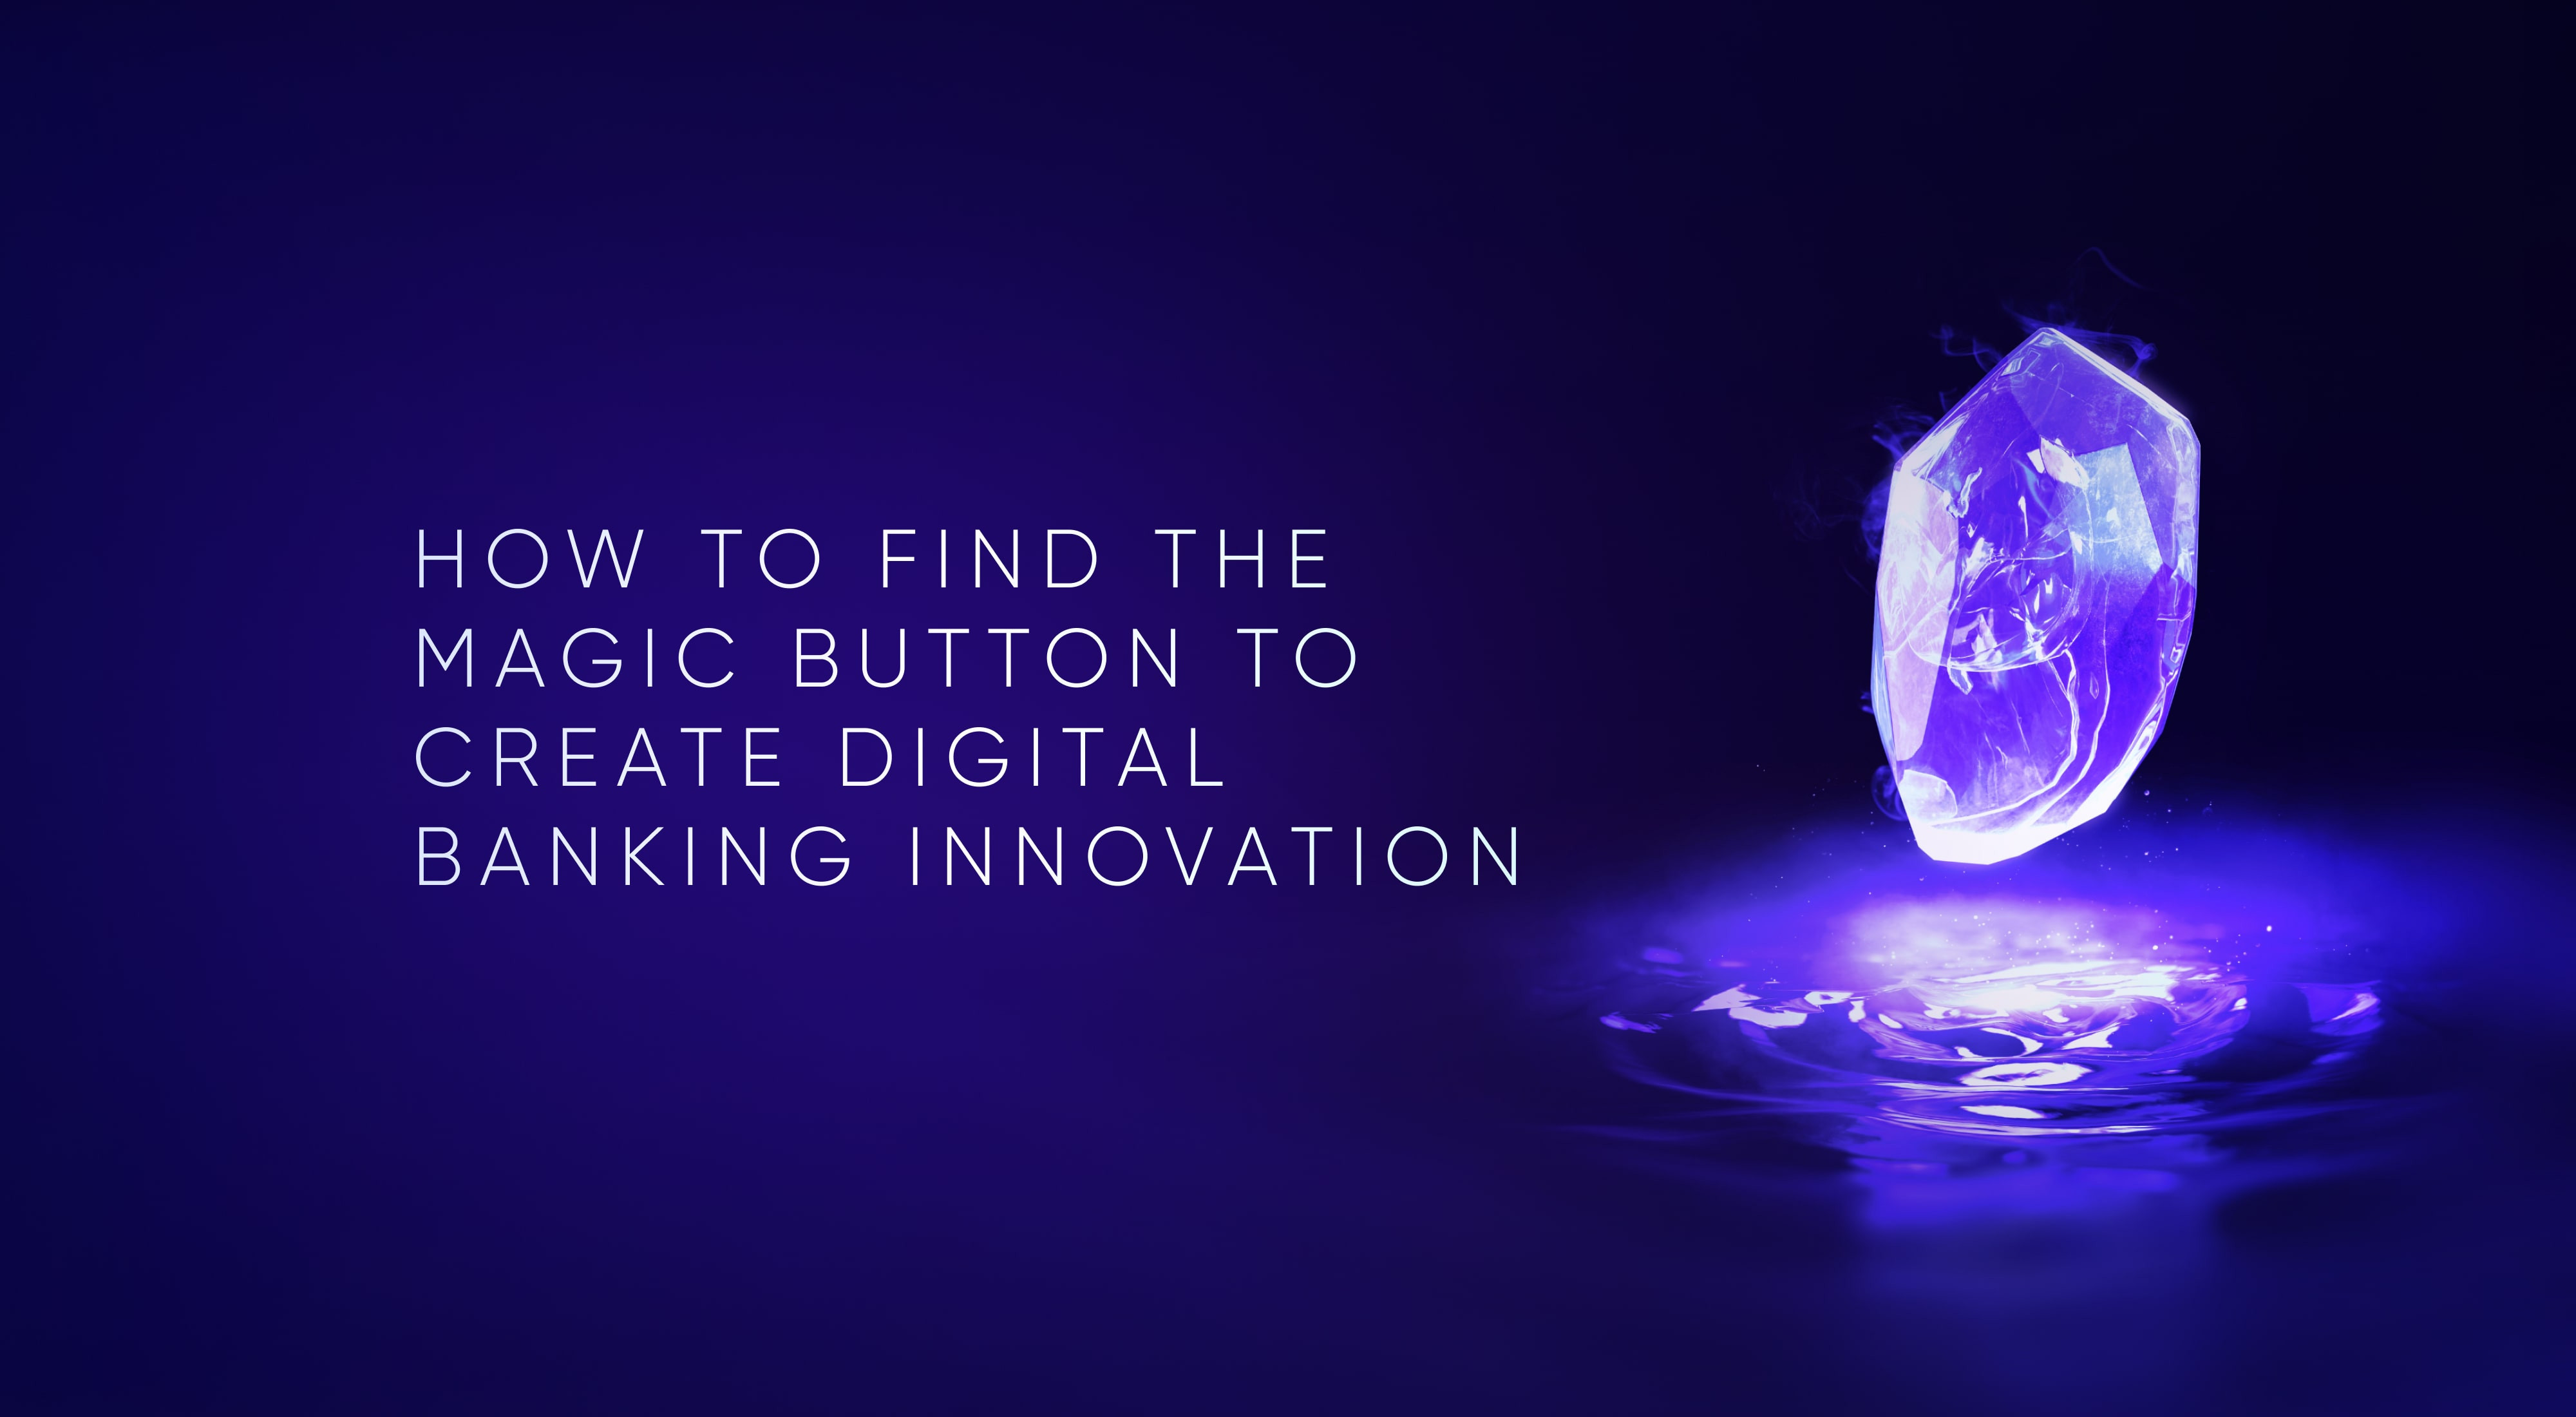 How to Find the Magic Button to Create Digital Banking Innovation